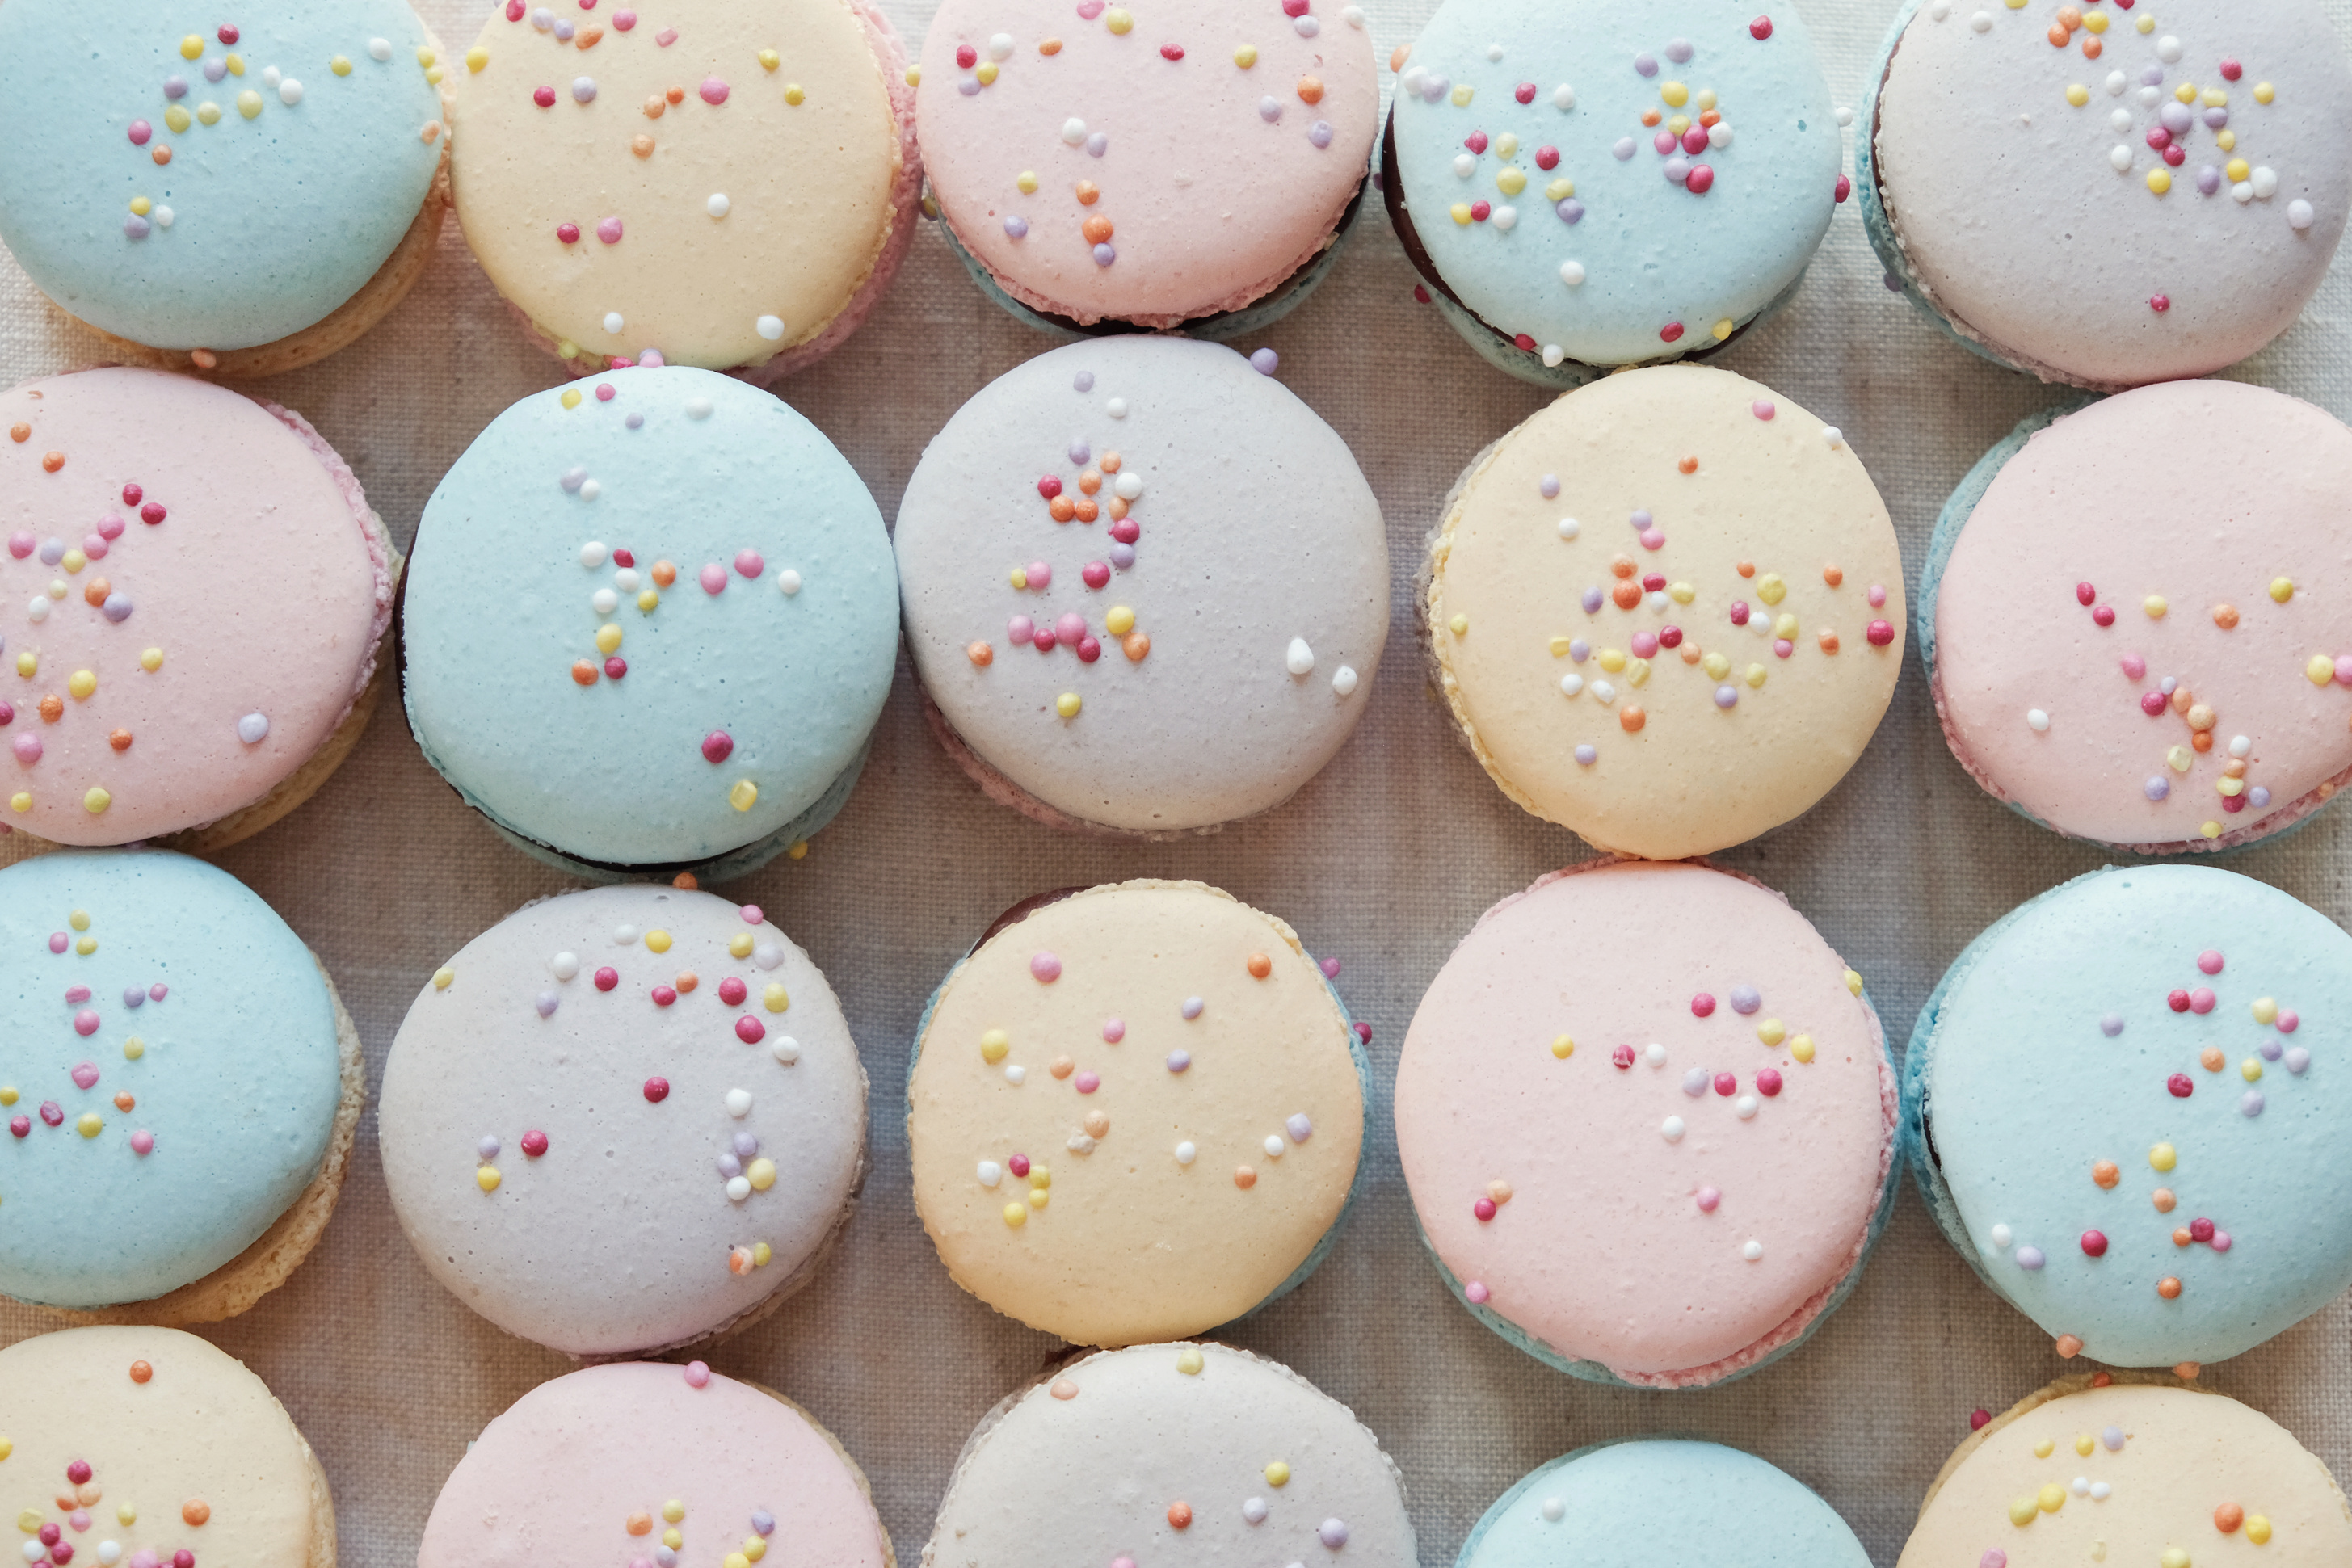 Homemade colorful pastel macaroons